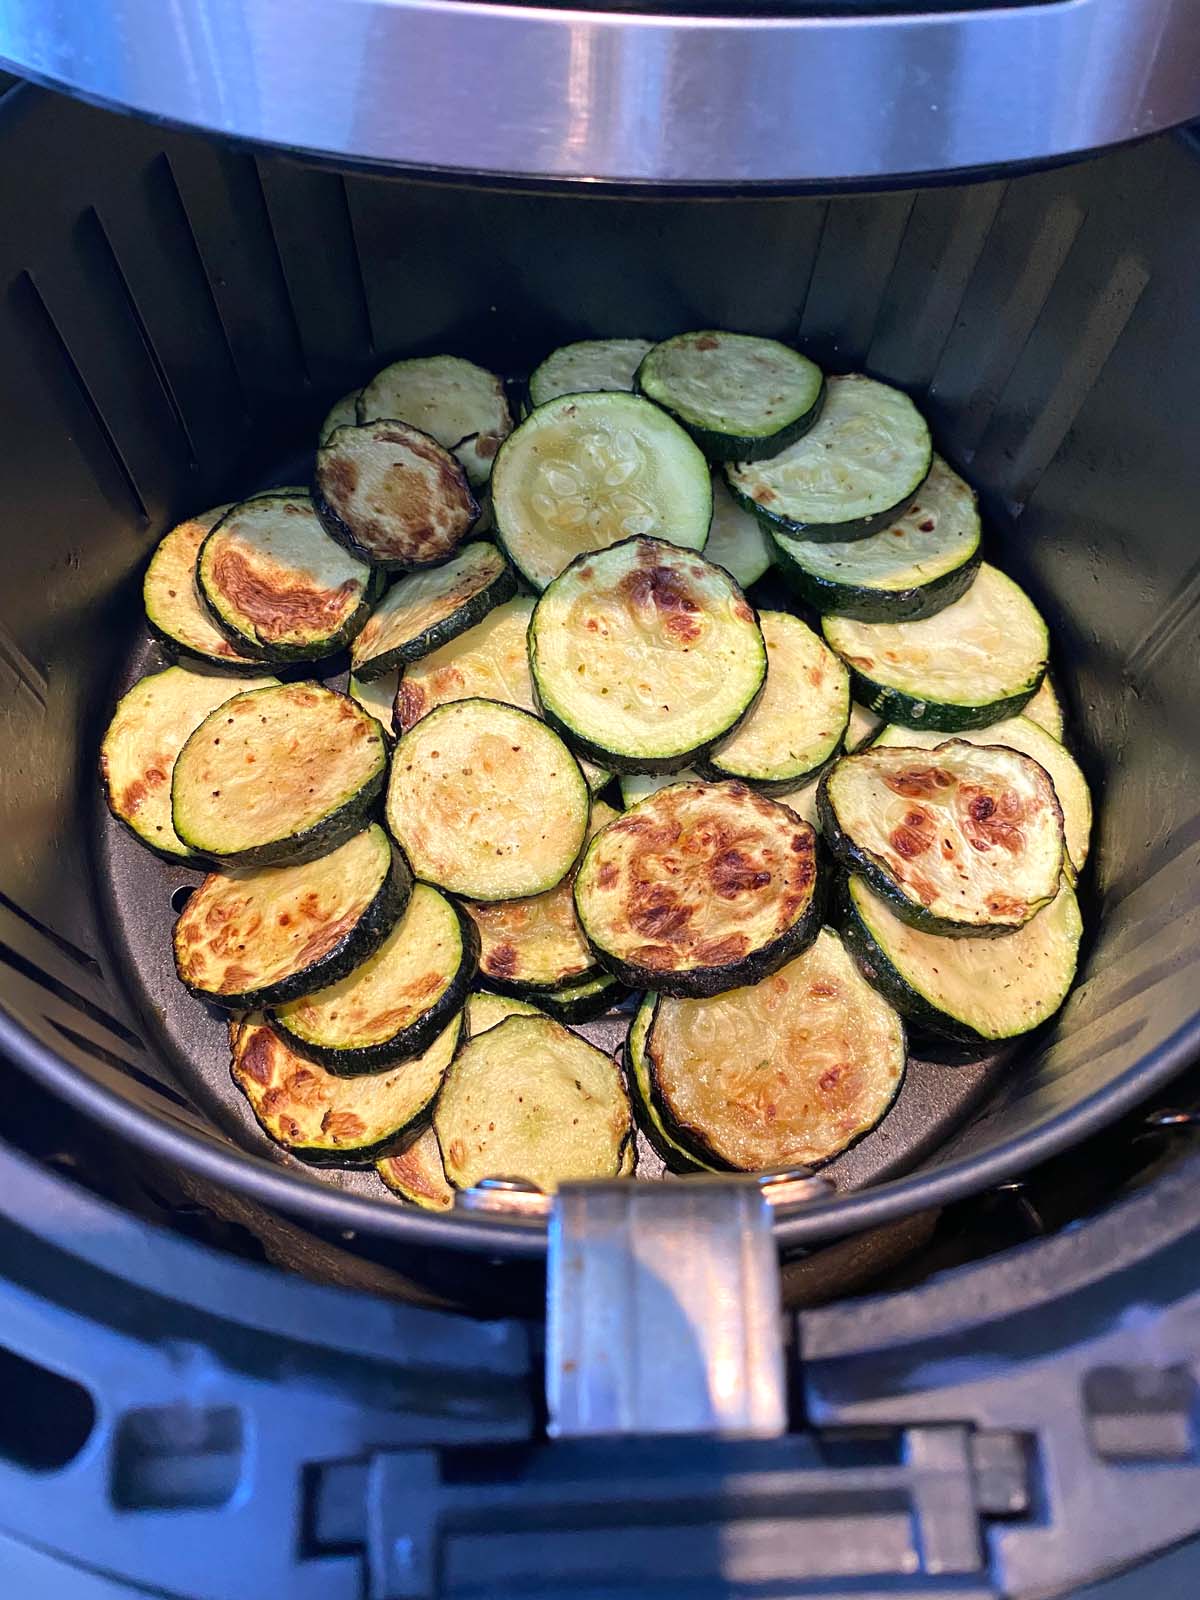 Air fryer roasted zucchini slices in the air fryer basket.